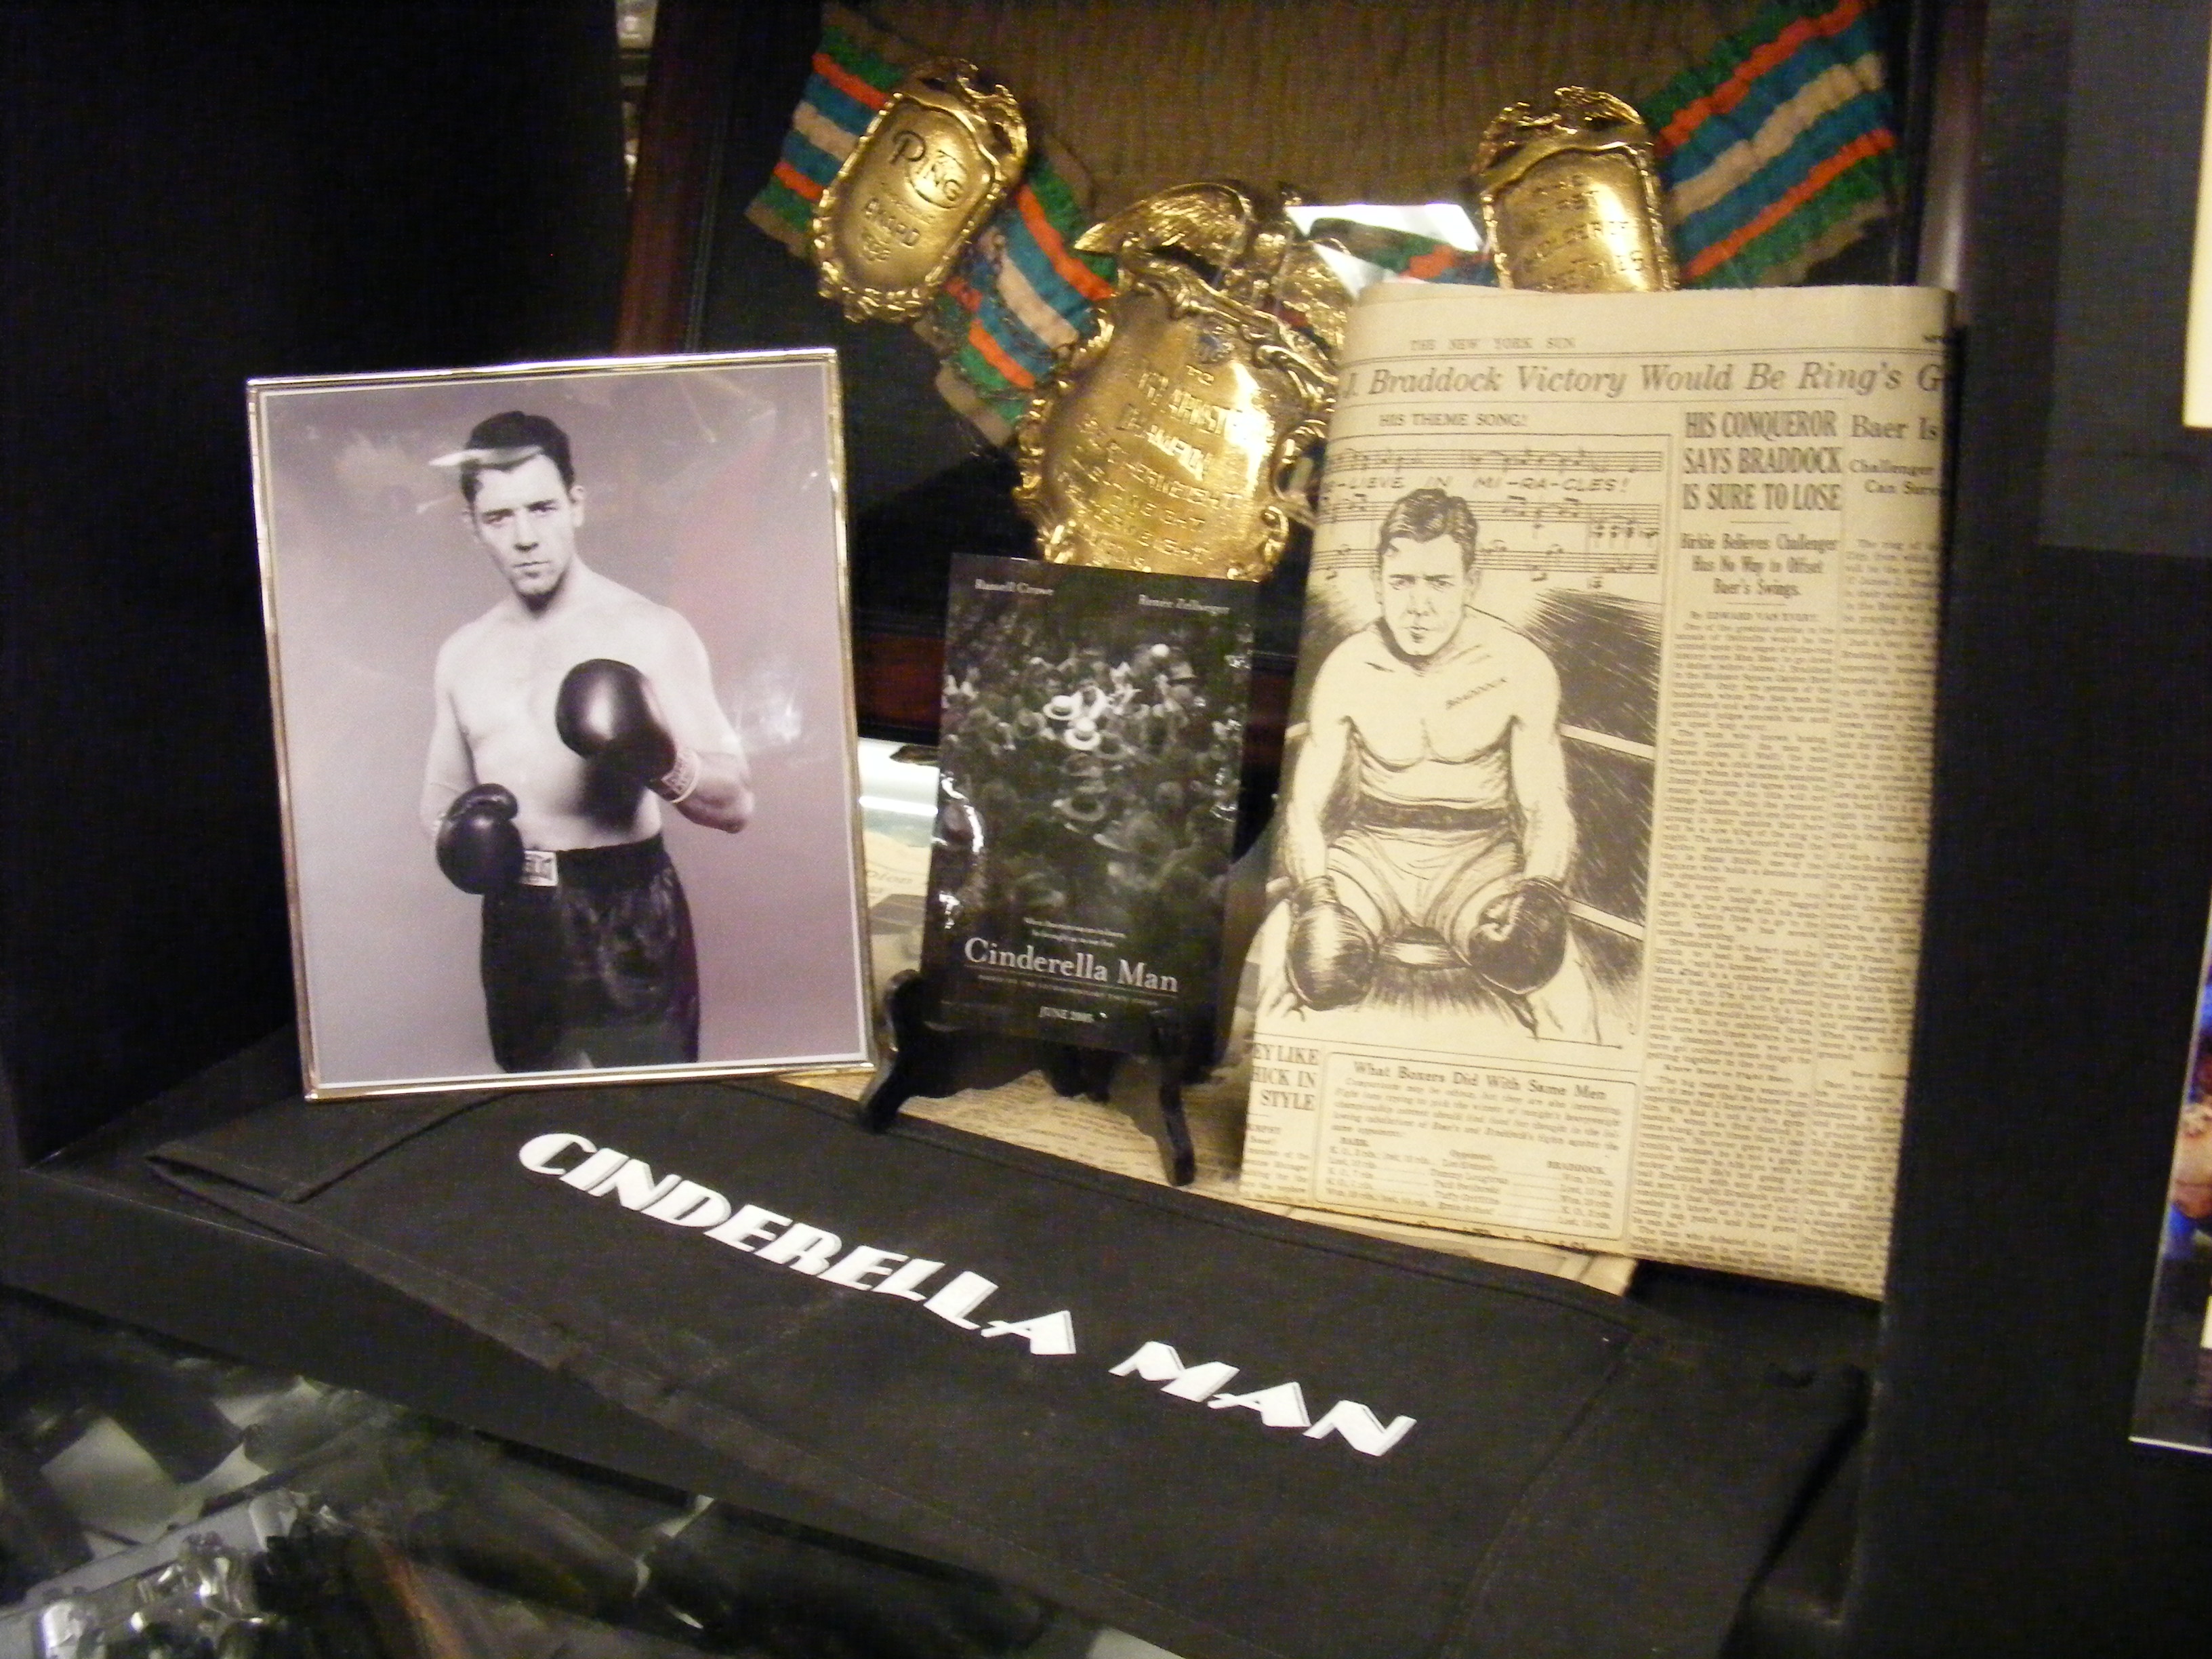 props from the Russell Crowe film Cinderella Man.